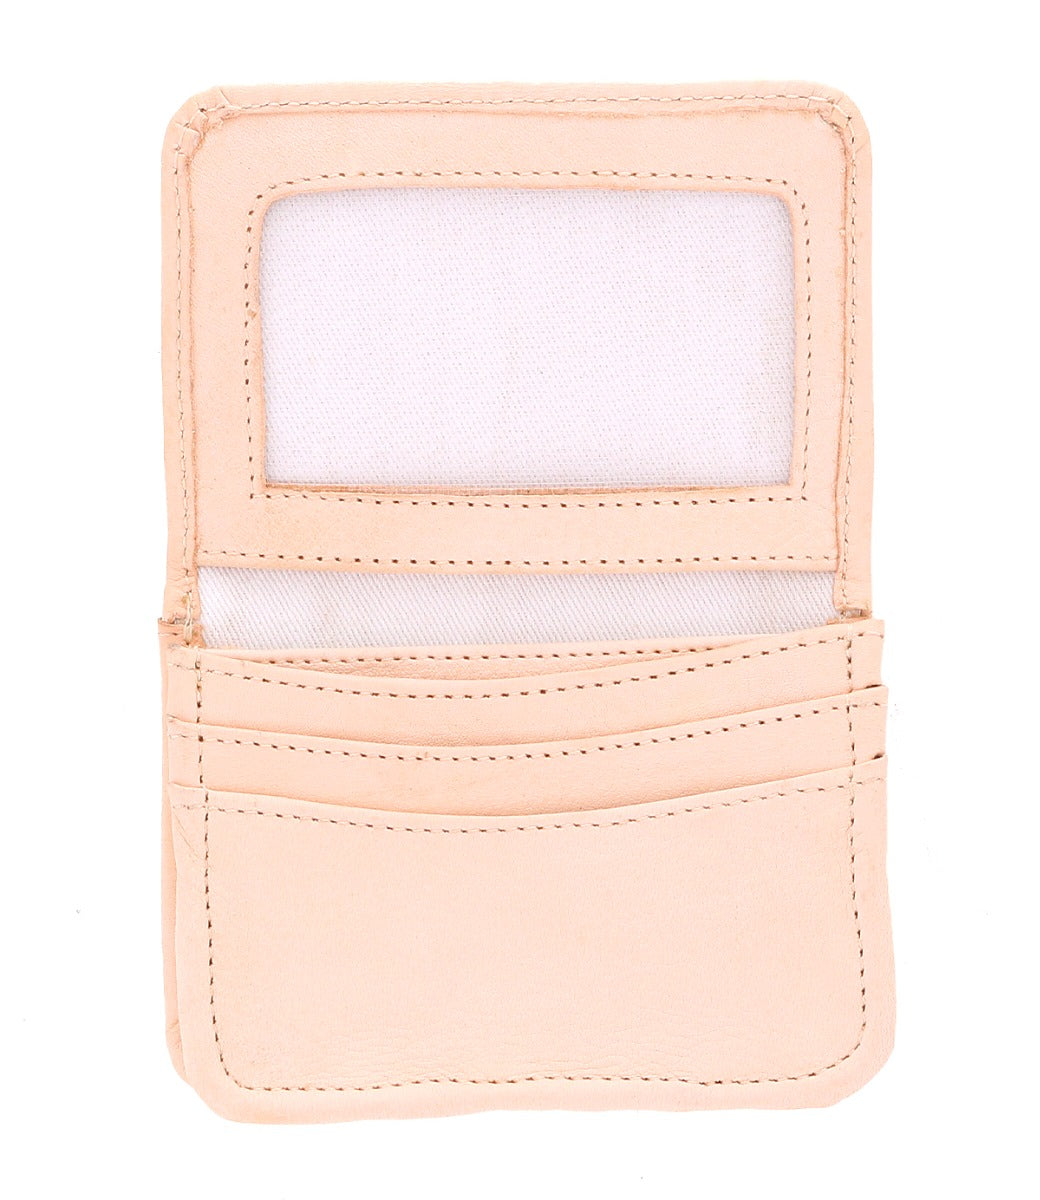 A beige leather Jeor wallet with two compartments, by Bed Stu.